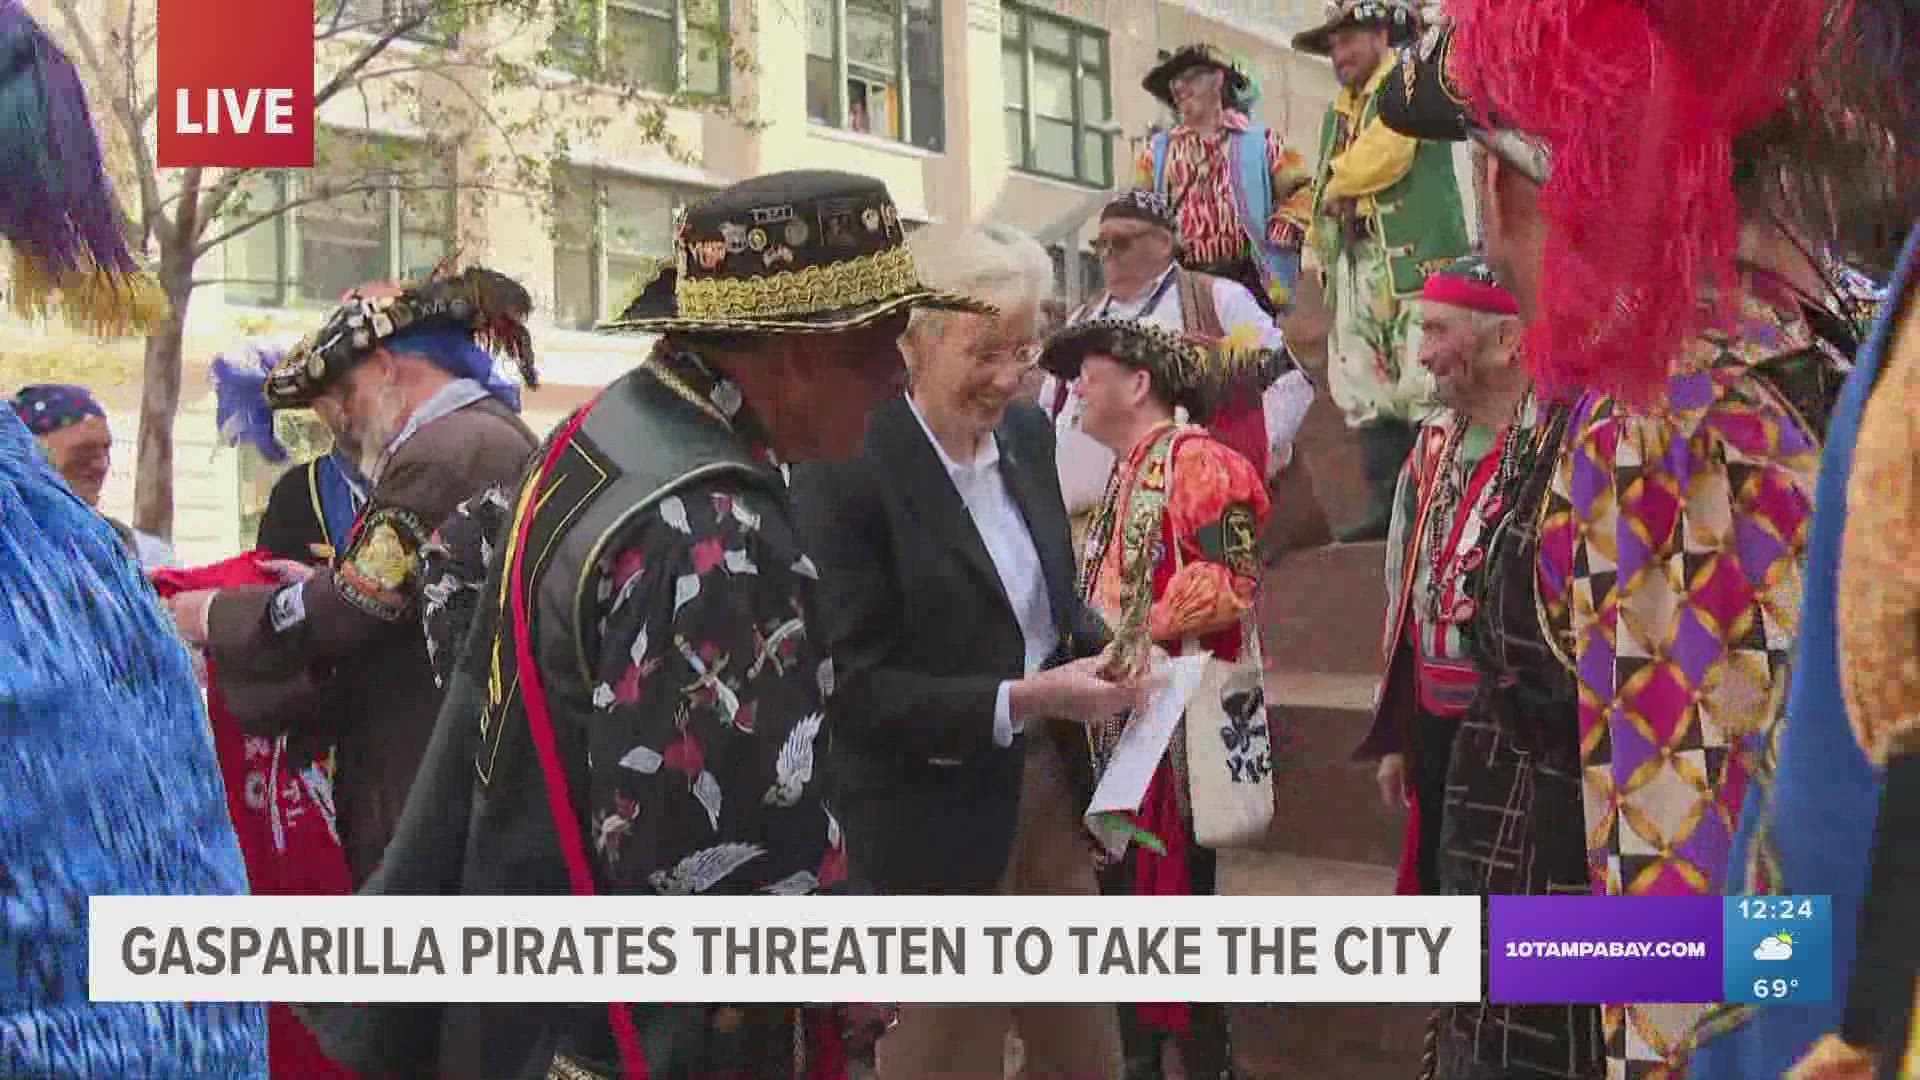 The pirates tried to negotiate a peaceful surrender of the city with Mayor Jane Castor – but she said, "absolutely not!"